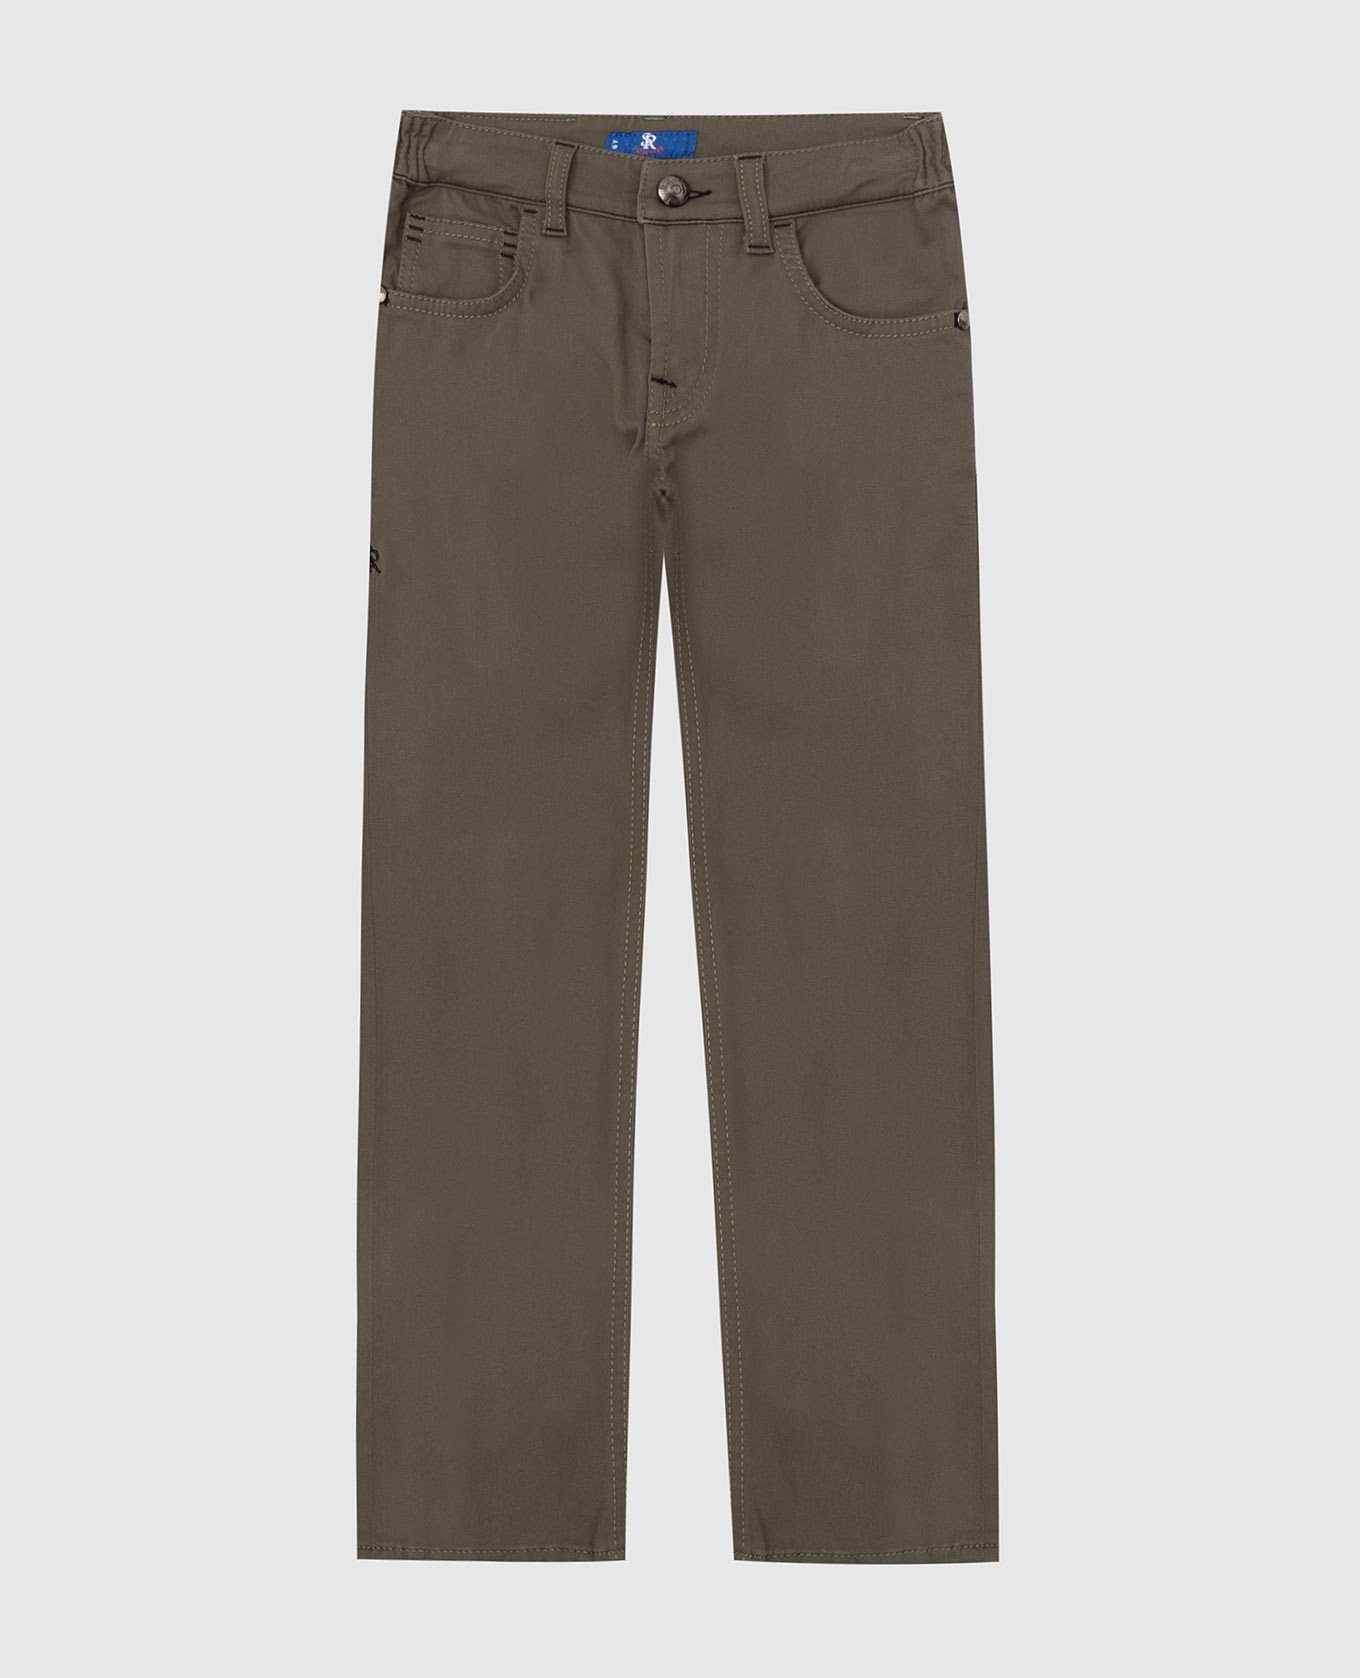 Children's olive trousers